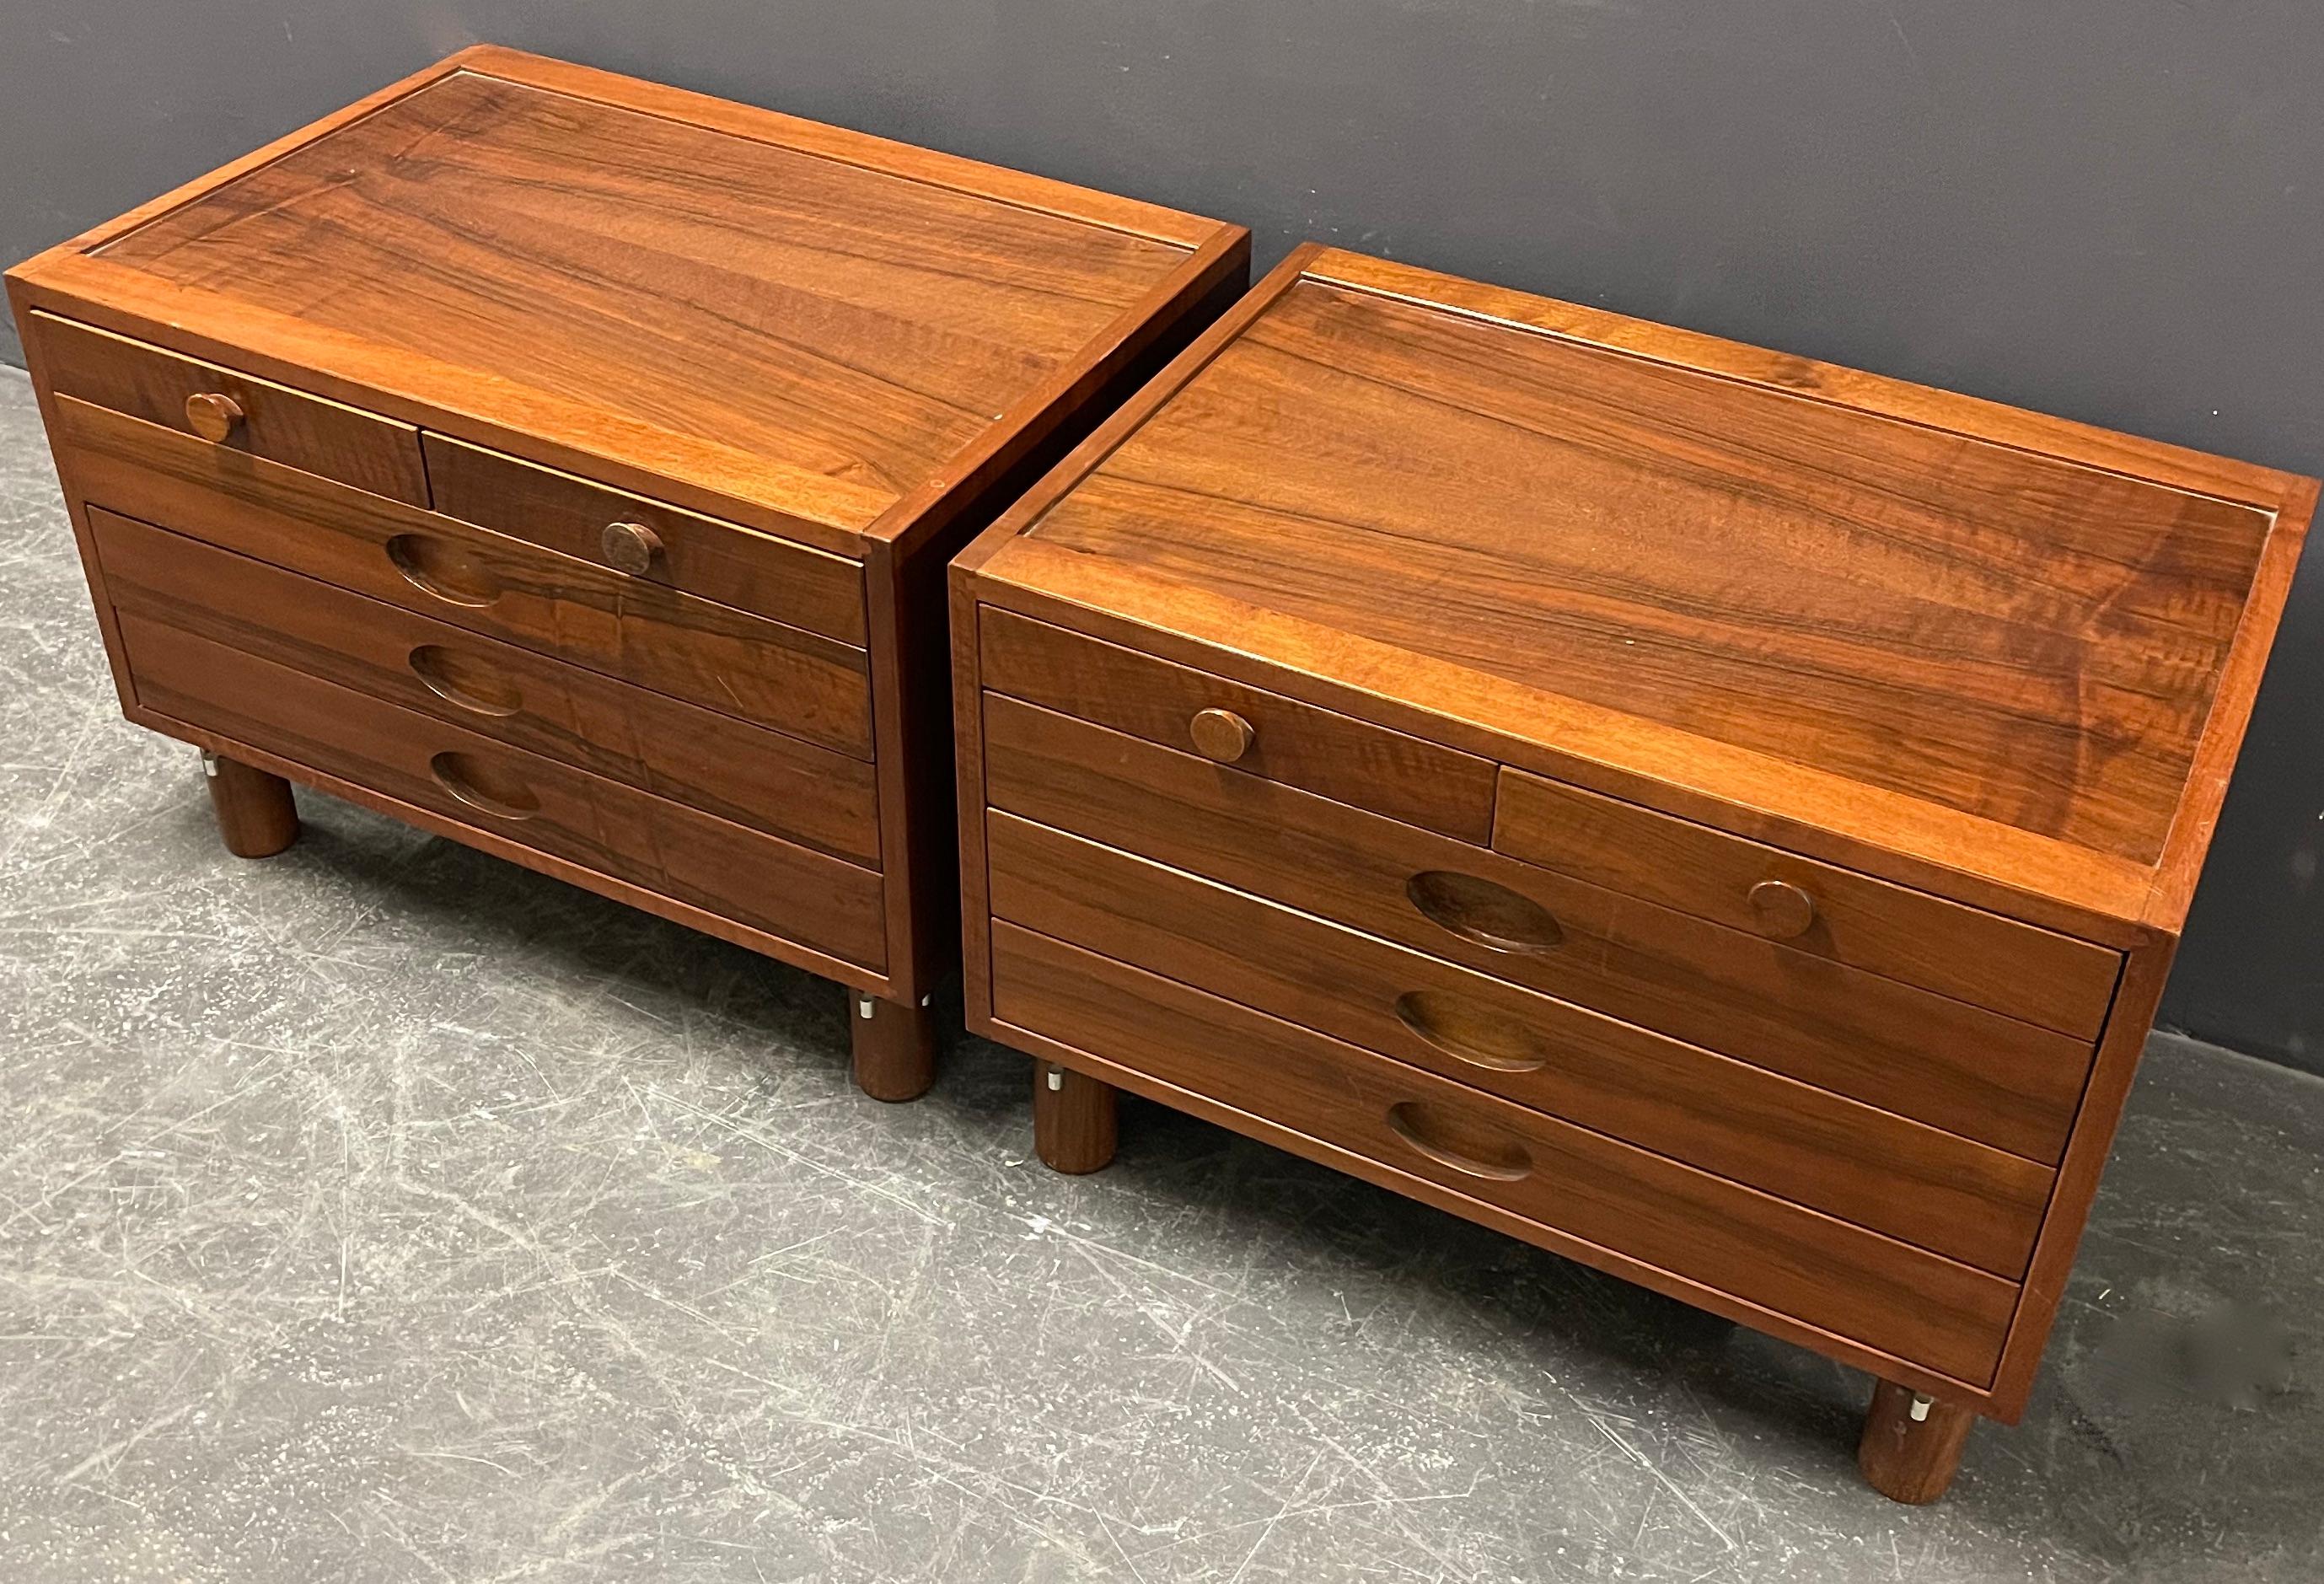 nice set of two chests of drawers, bedside tables or a low sideboard by gianfanco frattini for bernini. wonderful wood and elegant clear lines.